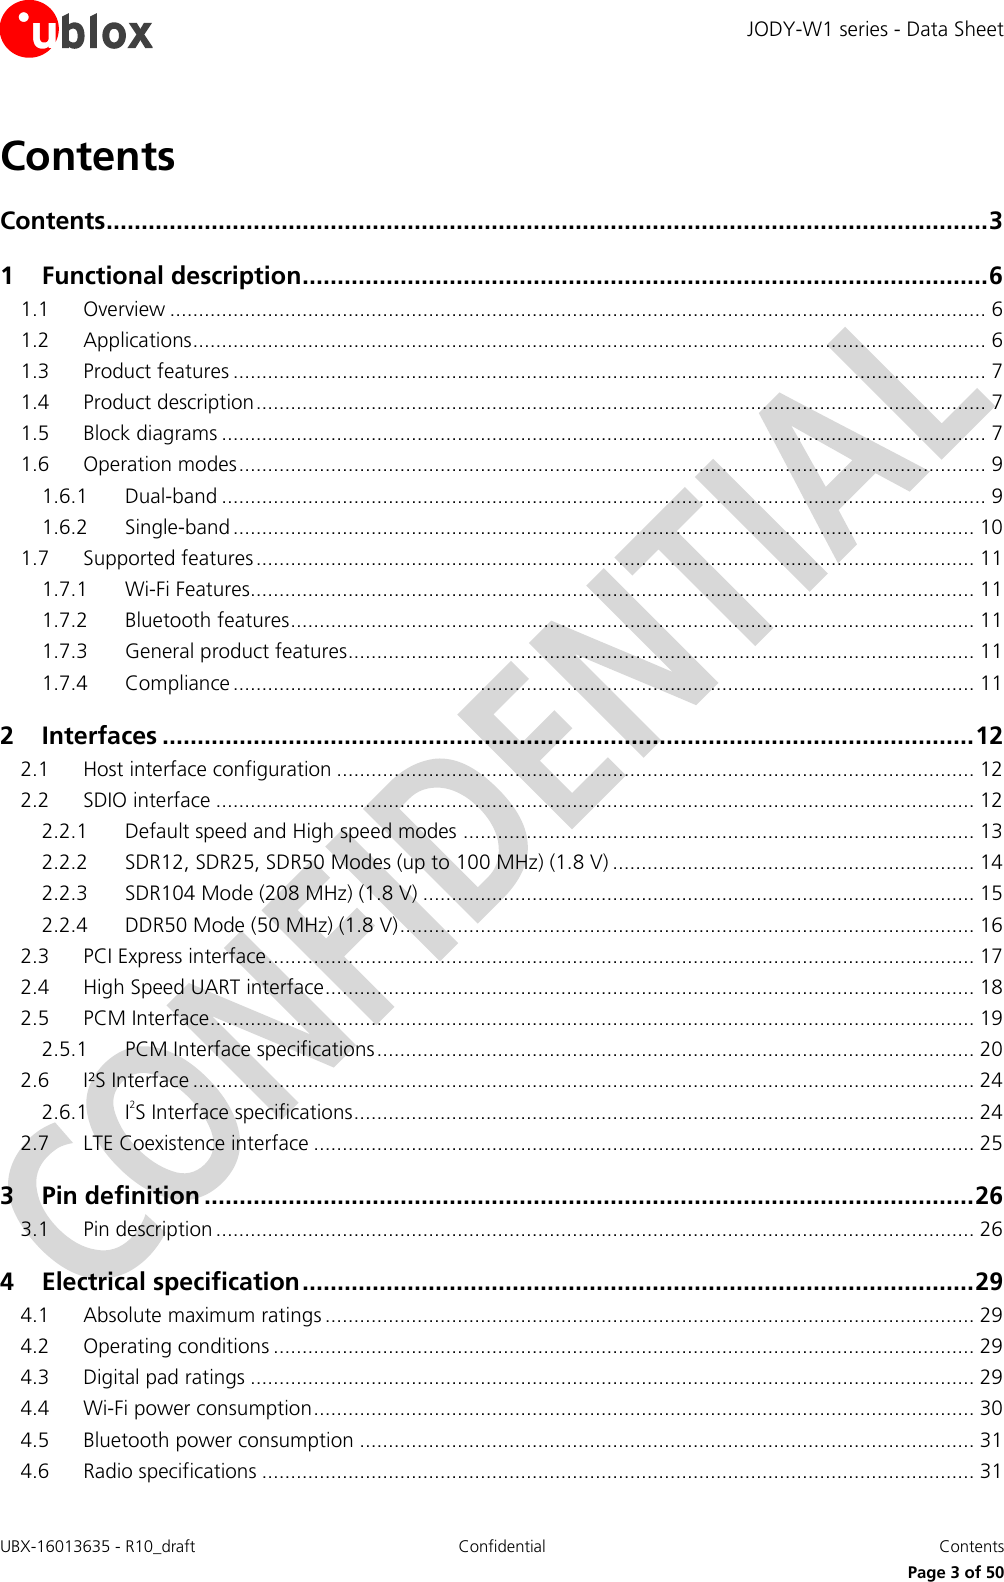 JODY-W1 series - Data Sheet UBX-16013635 - R10_draft Confidential  Contents     Page 3 of 50 Contents Contents .............................................................................................................................. 3 1 Functional description .................................................................................................. 6 1.1 Overview .............................................................................................................................................. 6 1.2 Applications .......................................................................................................................................... 6 1.3 Product features ................................................................................................................................... 7 1.4 Product description ............................................................................................................................... 7 1.5 Block diagrams ..................................................................................................................................... 7 1.6 Operation modes .................................................................................................................................. 9 1.6.1 Dual-band ..................................................................................................................................... 9 1.6.2 Single-band ................................................................................................................................. 10 1.7 Supported features ............................................................................................................................. 11 1.7.1 Wi-Fi Features.............................................................................................................................. 11 1.7.2 Bluetooth features ....................................................................................................................... 11 1.7.3 General product features ............................................................................................................. 11 1.7.4 Compliance ................................................................................................................................. 11 2 Interfaces .................................................................................................................... 12 2.1 Host interface configuration ............................................................................................................... 12 2.2 SDIO interface .................................................................................................................................... 12 2.2.1 Default speed and High speed modes ......................................................................................... 13 2.2.2 SDR12, SDR25, SDR50 Modes (up to 100 MHz) (1.8 V) ............................................................... 14 2.2.3 SDR104 Mode (208 MHz) (1.8 V) ................................................................................................ 15 2.2.4 DDR50 Mode (50 MHz) (1.8 V) .................................................................................................... 16 2.3 PCI Express interface ........................................................................................................................... 17 2.4 High Speed UART interface ................................................................................................................. 18 2.5 PCM Interface ..................................................................................................................................... 19 2.5.1 PCM Interface specifications ........................................................................................................ 20 2.6 I²S Interface ........................................................................................................................................ 24 2.6.1 I2S Interface specifications ............................................................................................................ 24 2.7 LTE Coexistence interface ................................................................................................................... 25 3 Pin definition .............................................................................................................. 26 3.1 Pin description .................................................................................................................................... 26 4 Electrical specification ................................................................................................ 29 4.1 Absolute maximum ratings ................................................................................................................. 29 4.2 Operating conditions .......................................................................................................................... 29 4.3 Digital pad ratings .............................................................................................................................. 29 4.4 Wi-Fi power consumption ................................................................................................................... 30 4.5 Bluetooth power consumption ........................................................................................................... 31 4.6 Radio specifications ............................................................................................................................ 31 